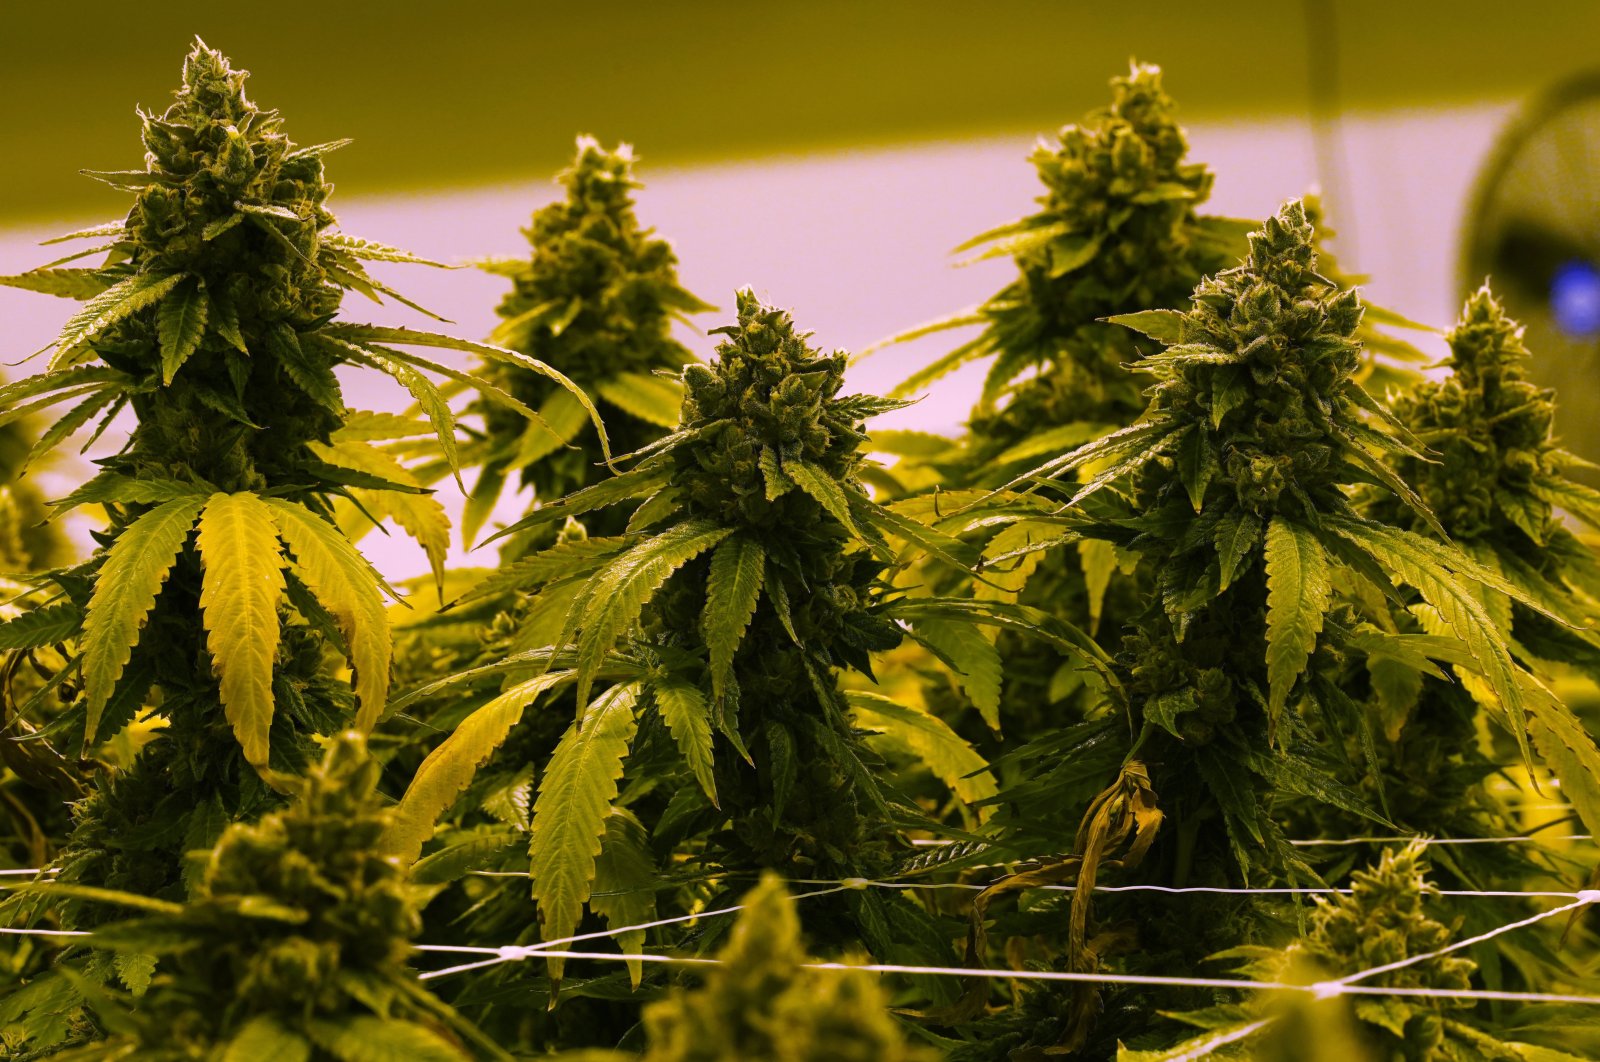 A cannabis plant that is close to harvest grows in a grow room at the Greenleaf Medical Cannabis facility in Richmond, Virginia, U.S., June 17, 2021. (AP Photo)